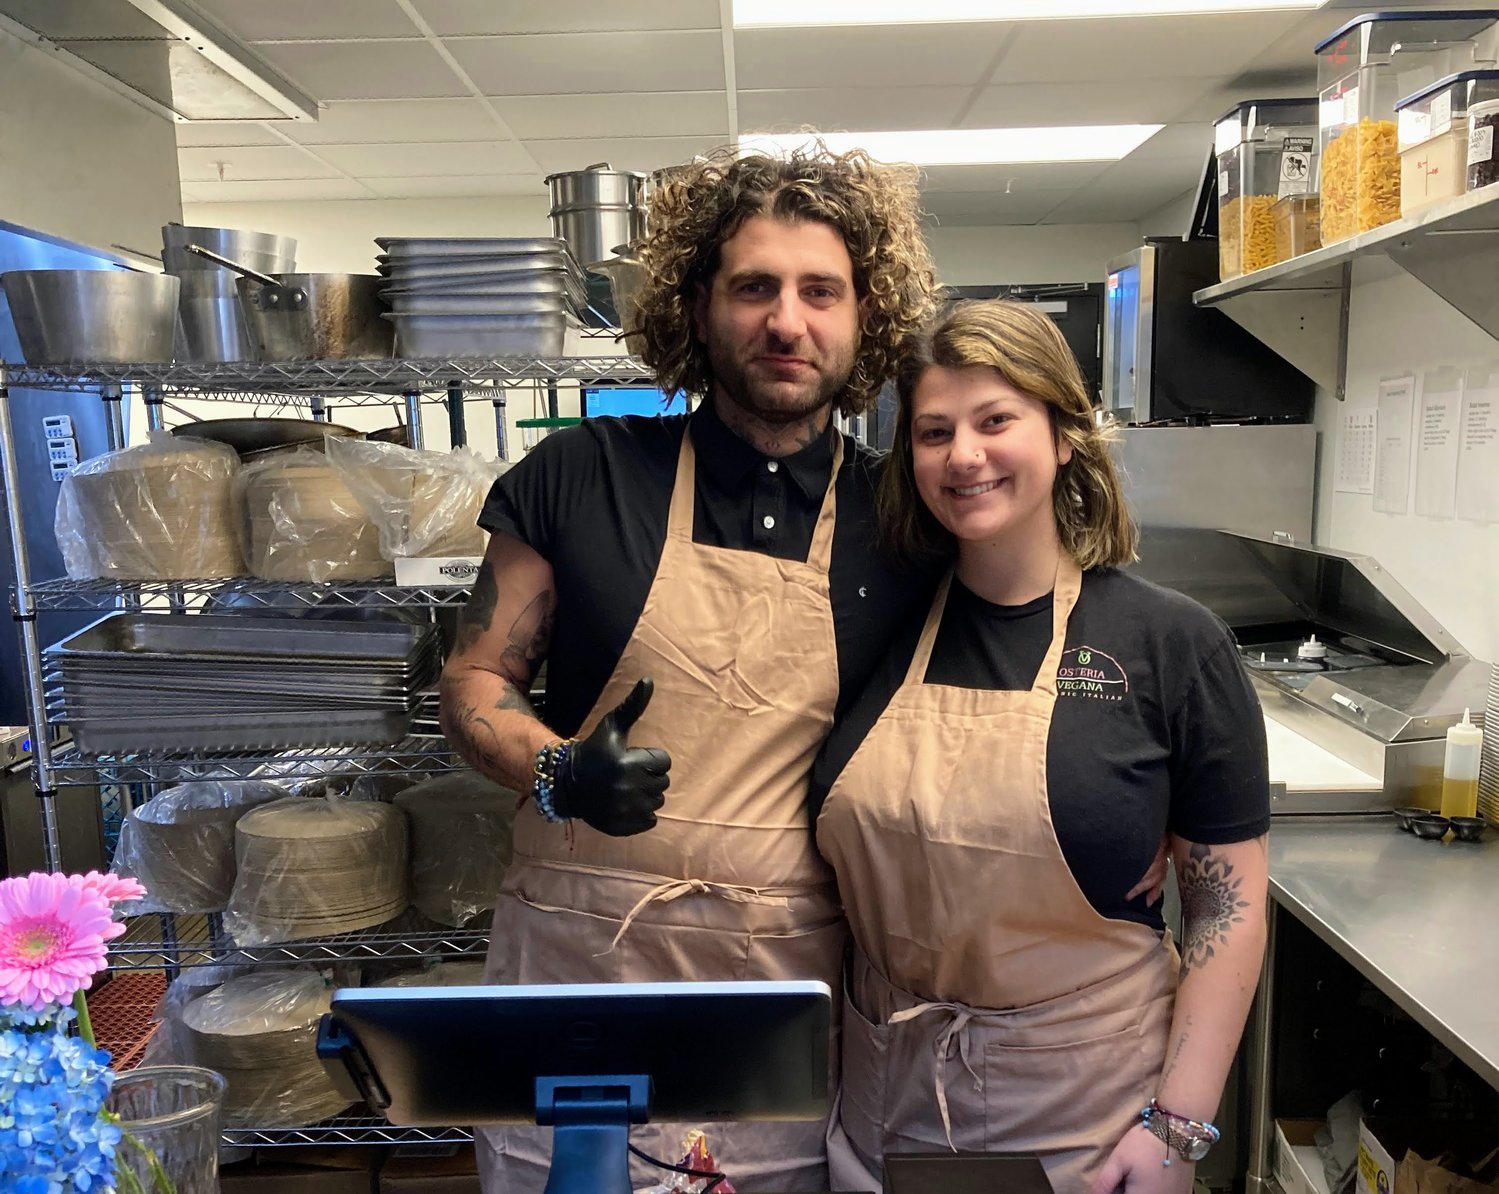 Chef Gianmarco Roselli and his wife, Avery, drive to and from Royal Oak every day to bring the people of Lansing healthy, vegan Italian food at their Lansing Shuffle food stall, Osteria Vegana.